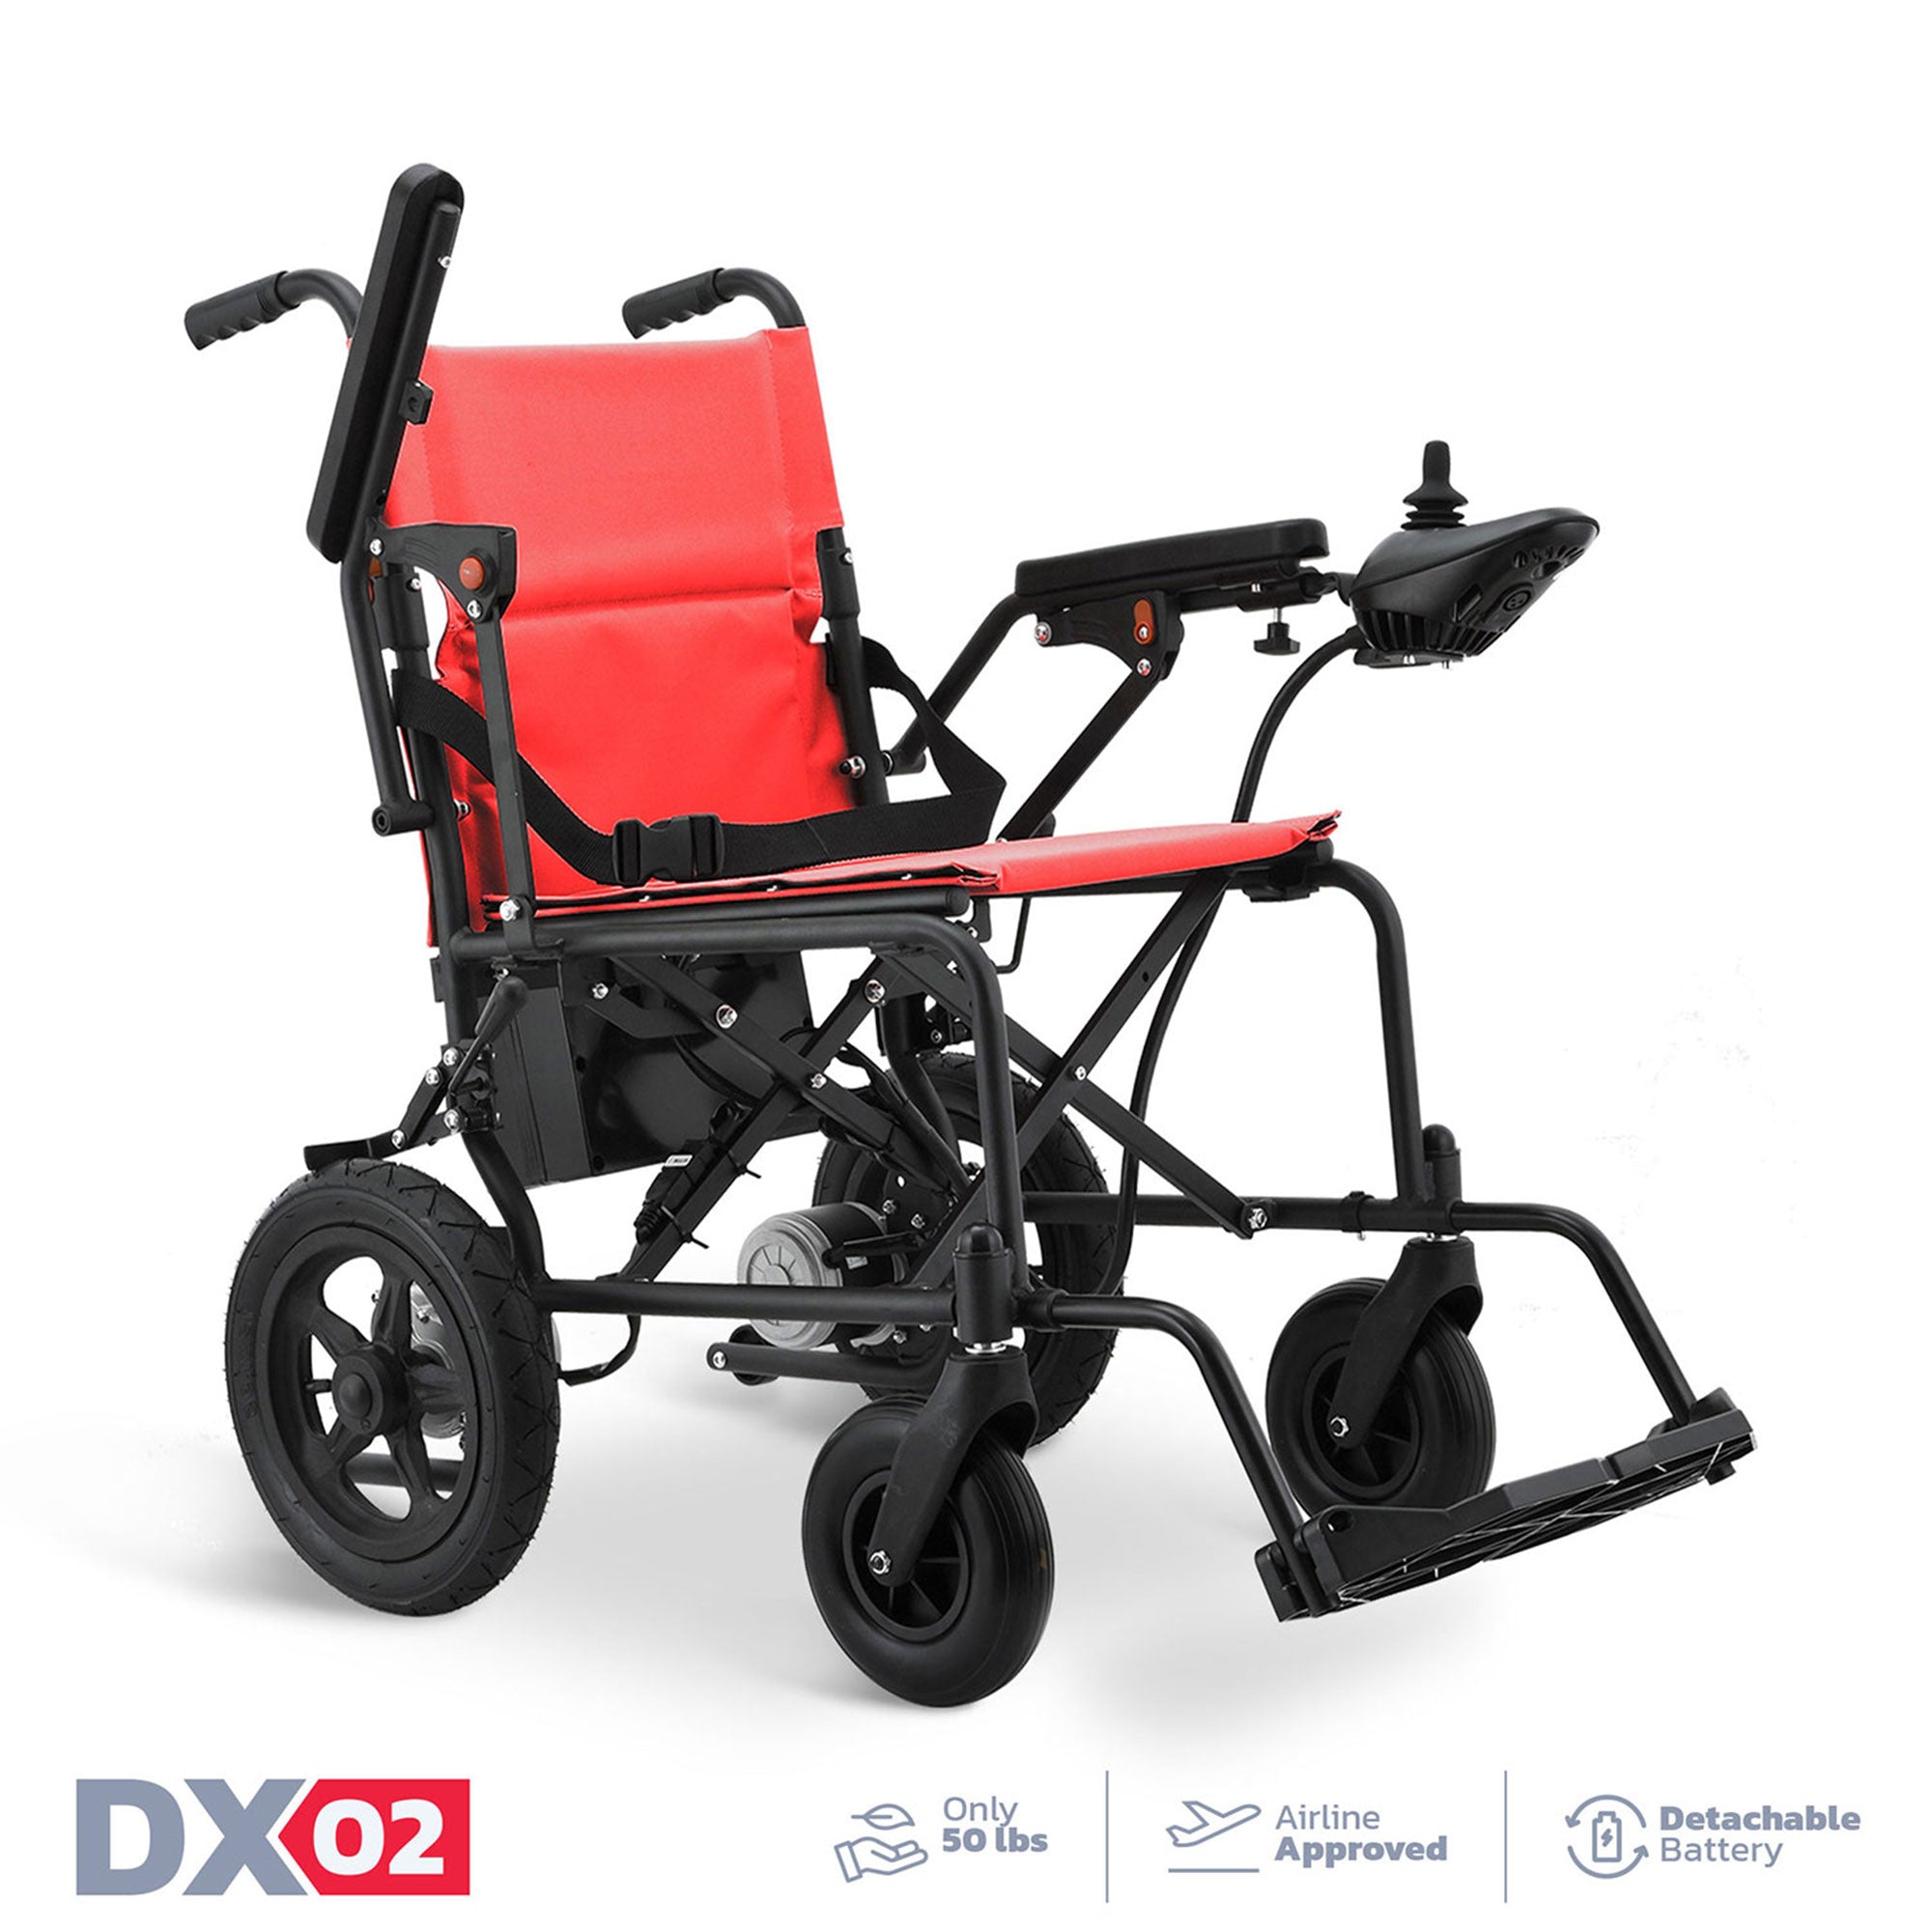 DX02 - Lightweight and Powerful Electric Wheelchair - Electricwheelchair.Store